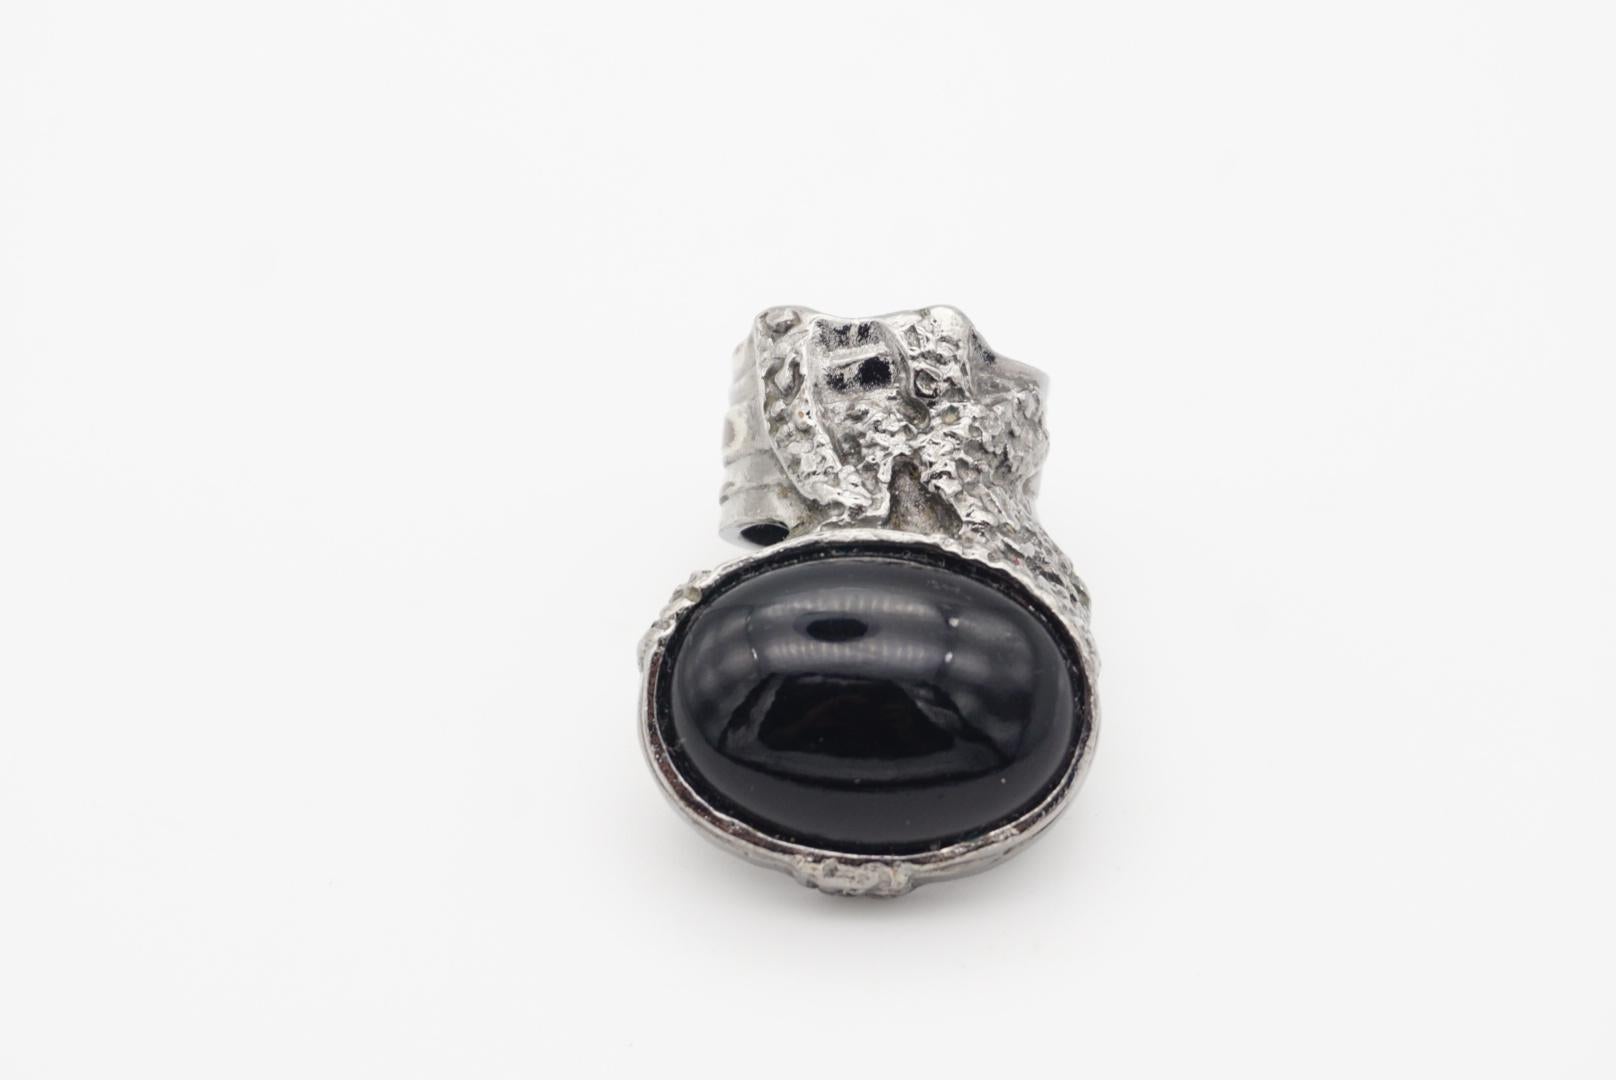 Yves Saint Laurent YSL Arty Black Cabochon Chunky Statement Silver Ring, Size 6 For Sale 1